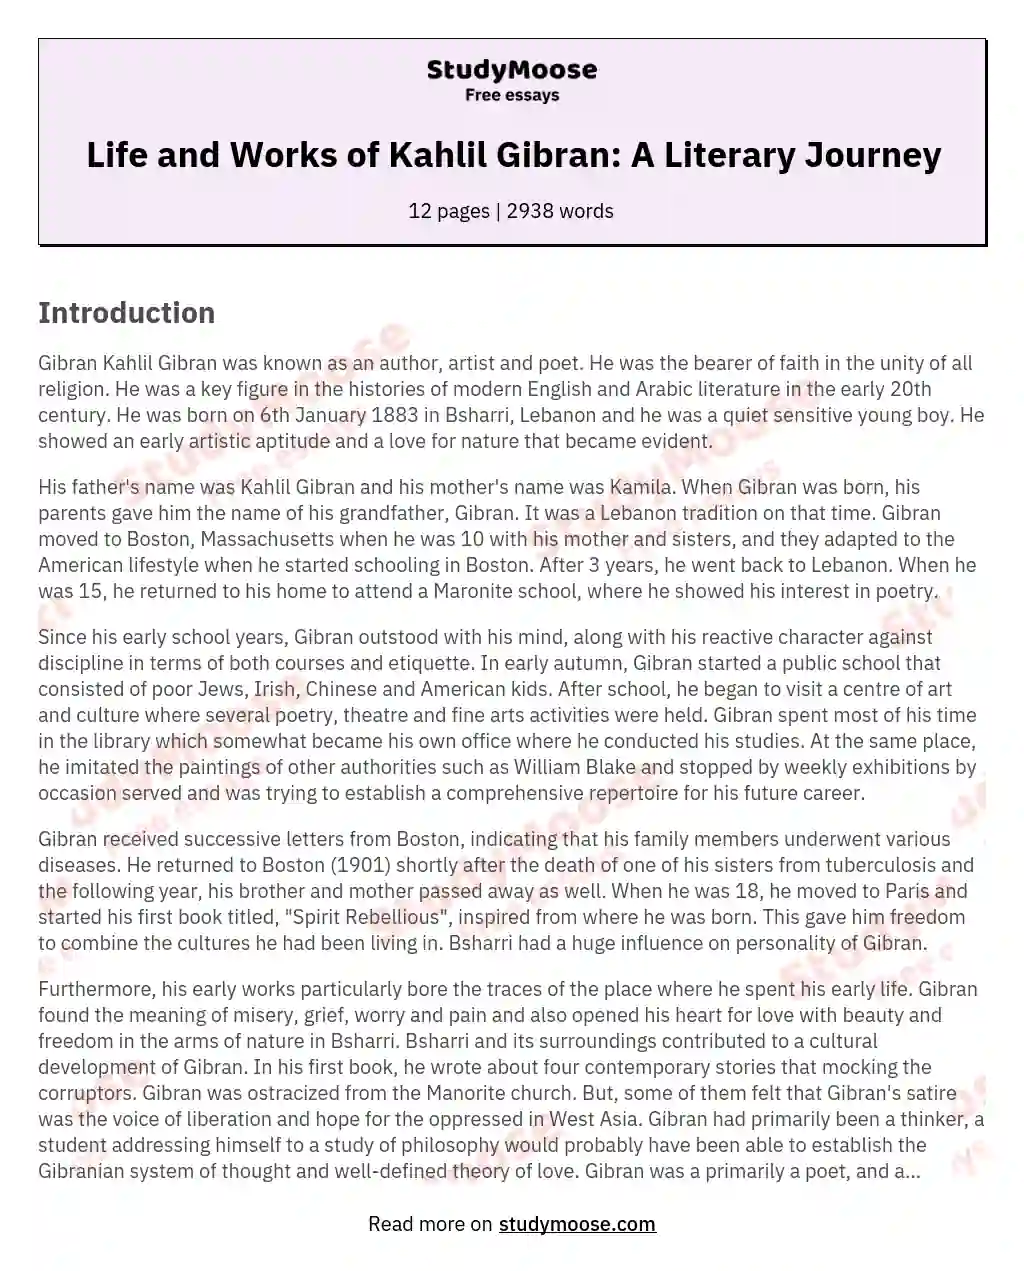 Life and Works of Kahlil Gibran: A Literary Journey essay